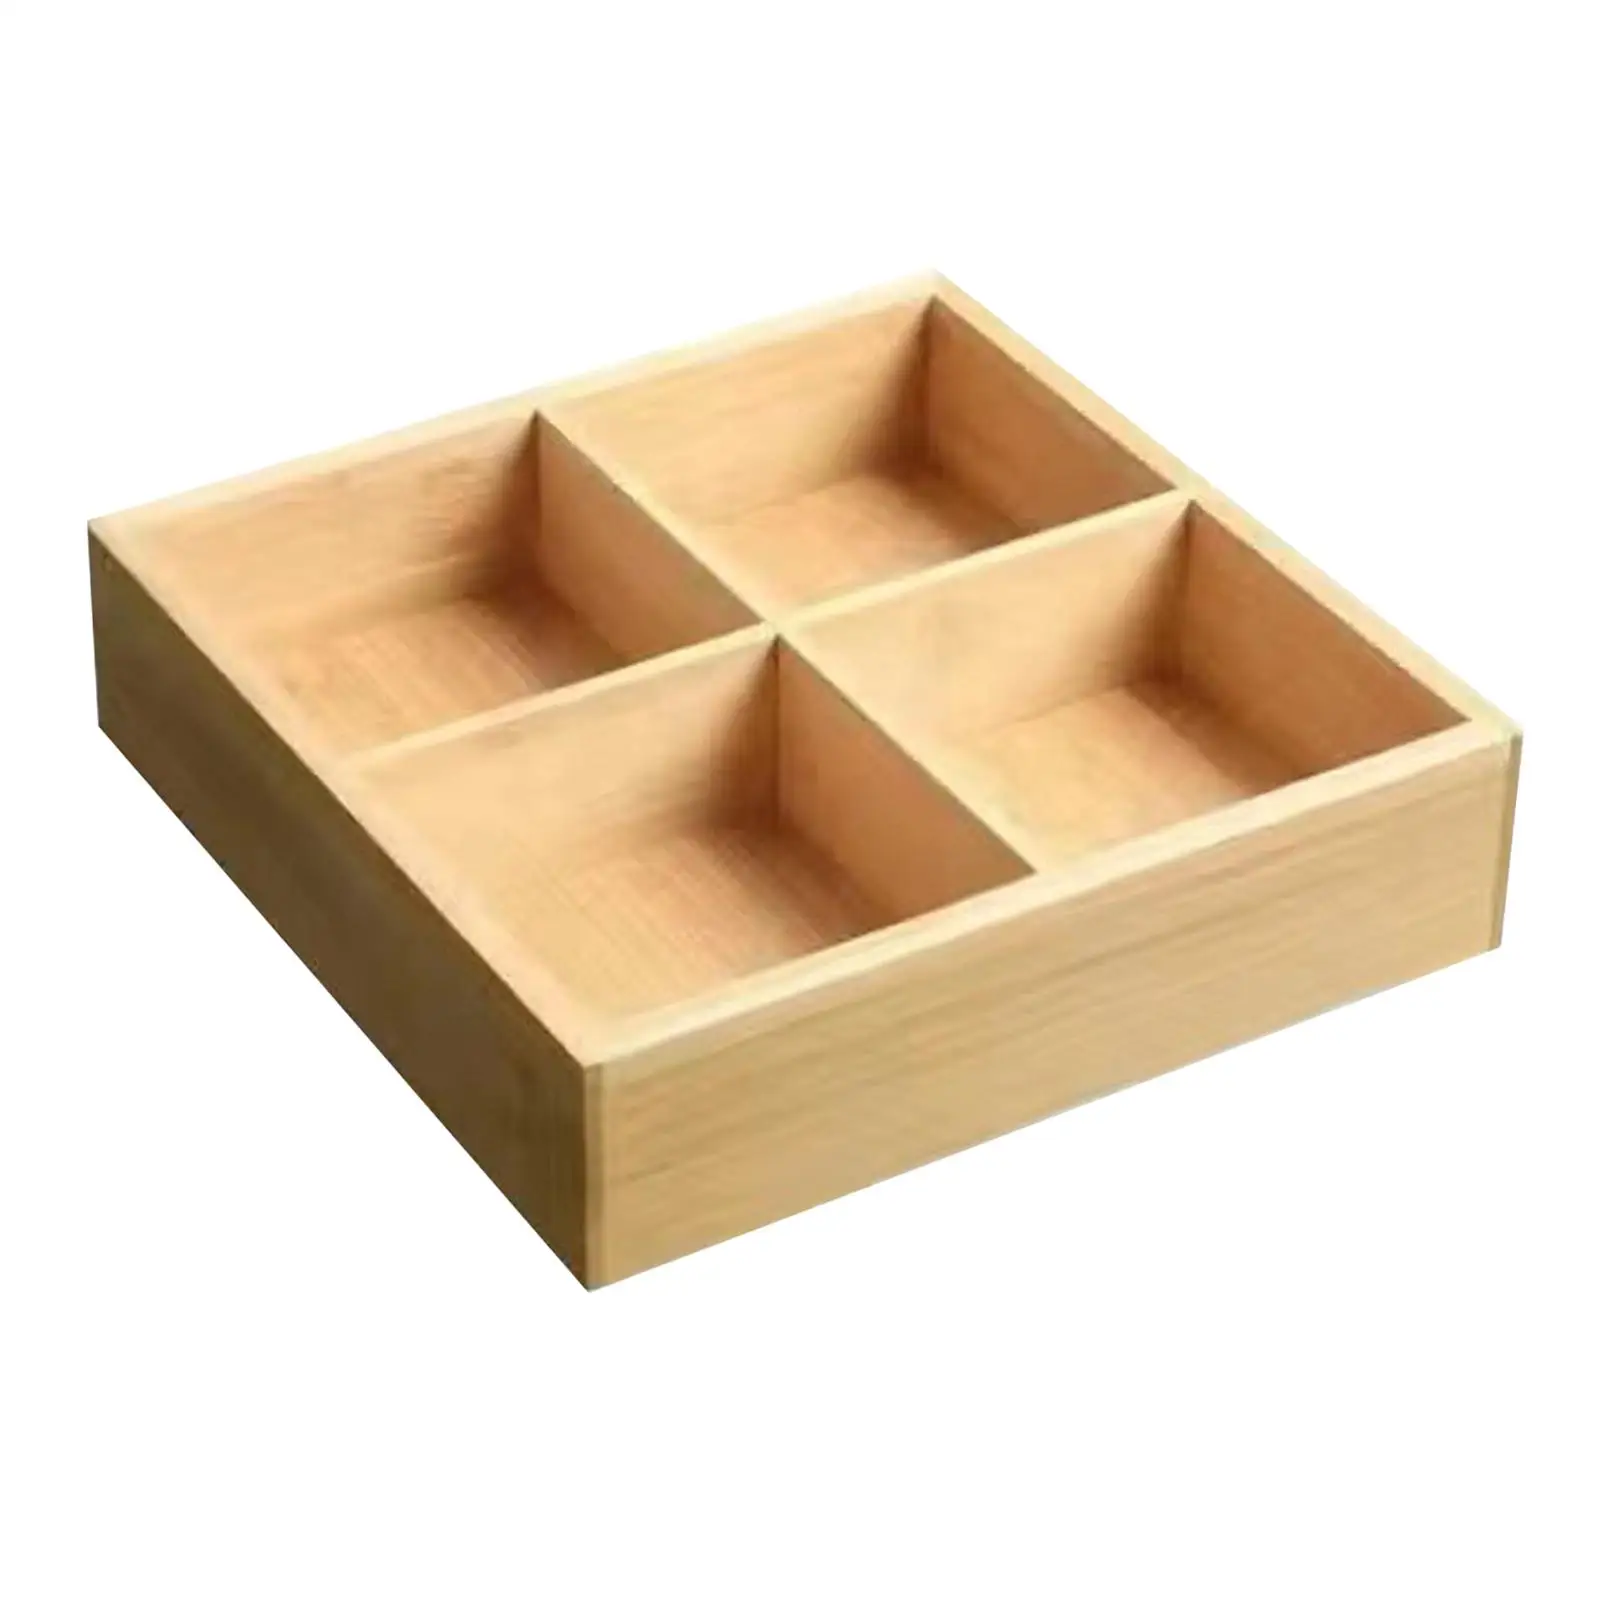 Wooden Dried Fruit Box Snack Tray Container Versatile for Dessert Fruit Veggie Widely Used